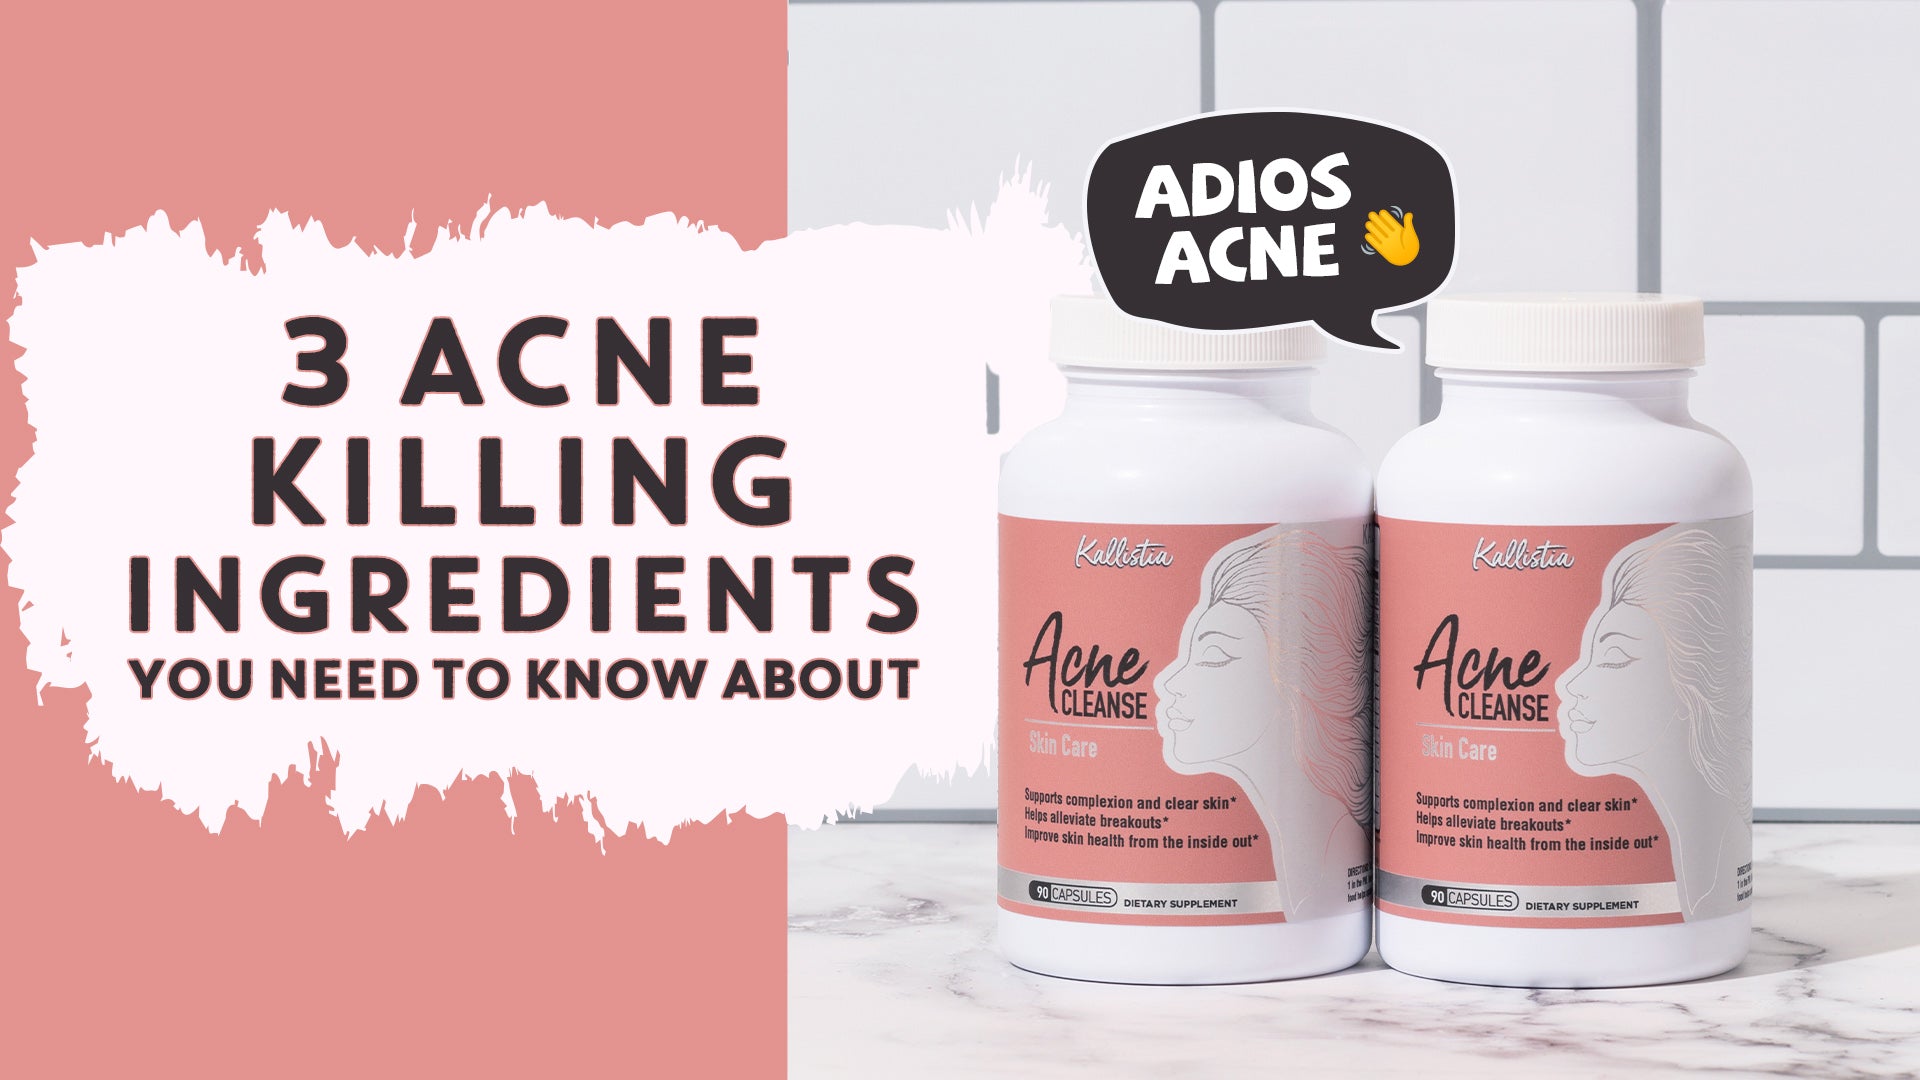 3 Acne Killing Ingredients you NEED to know about